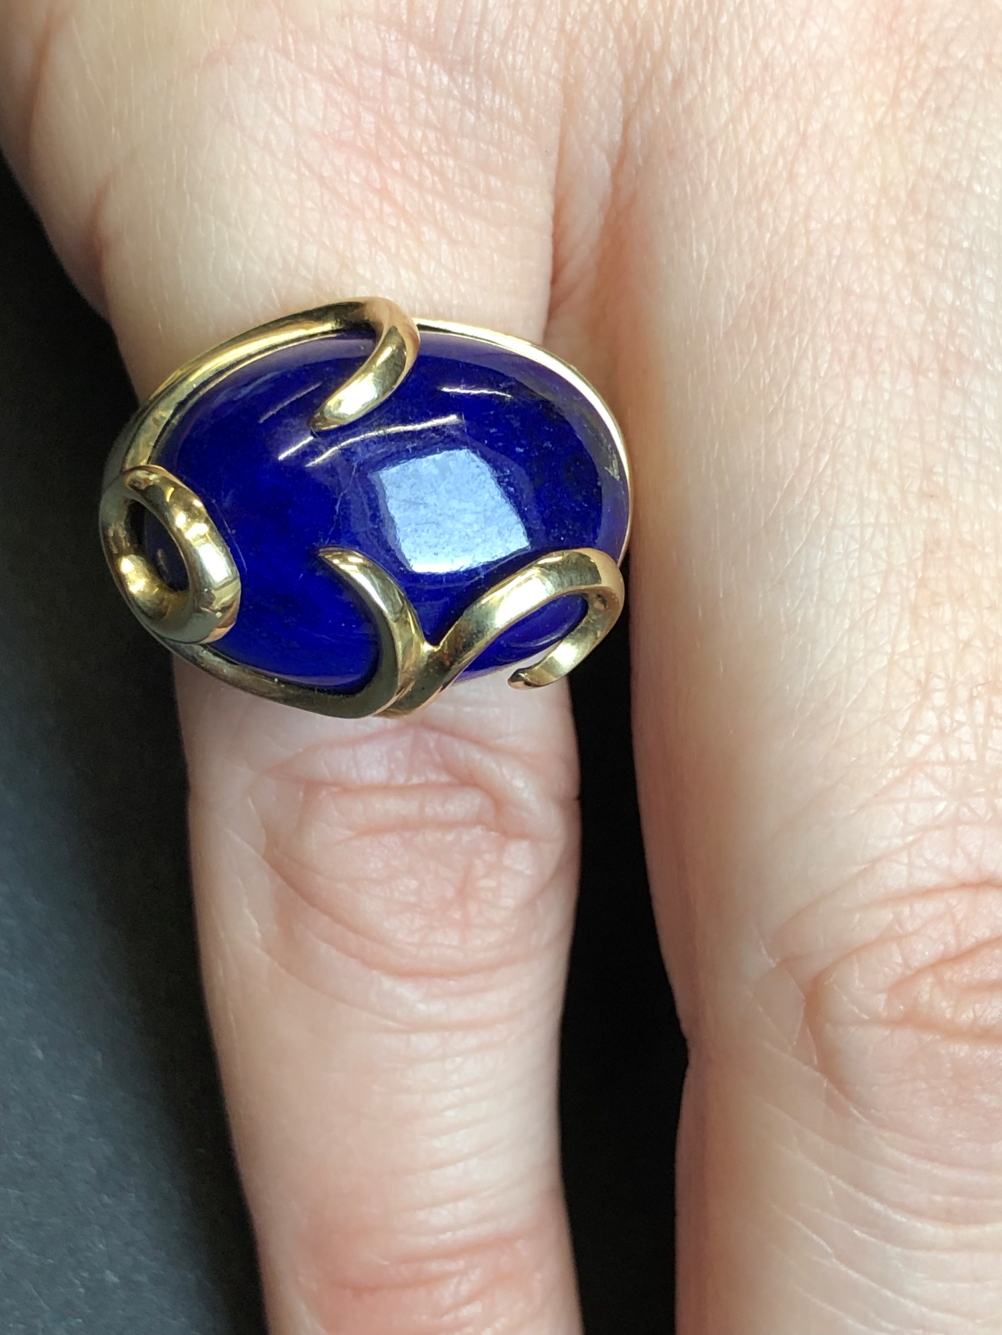 A CONTEMPORARY LAPIS LAZULI AND 9ct HALLMARKED GOLD RING. FINGER SIZE K. WEIGHT 8.73grms. - Image 6 of 8